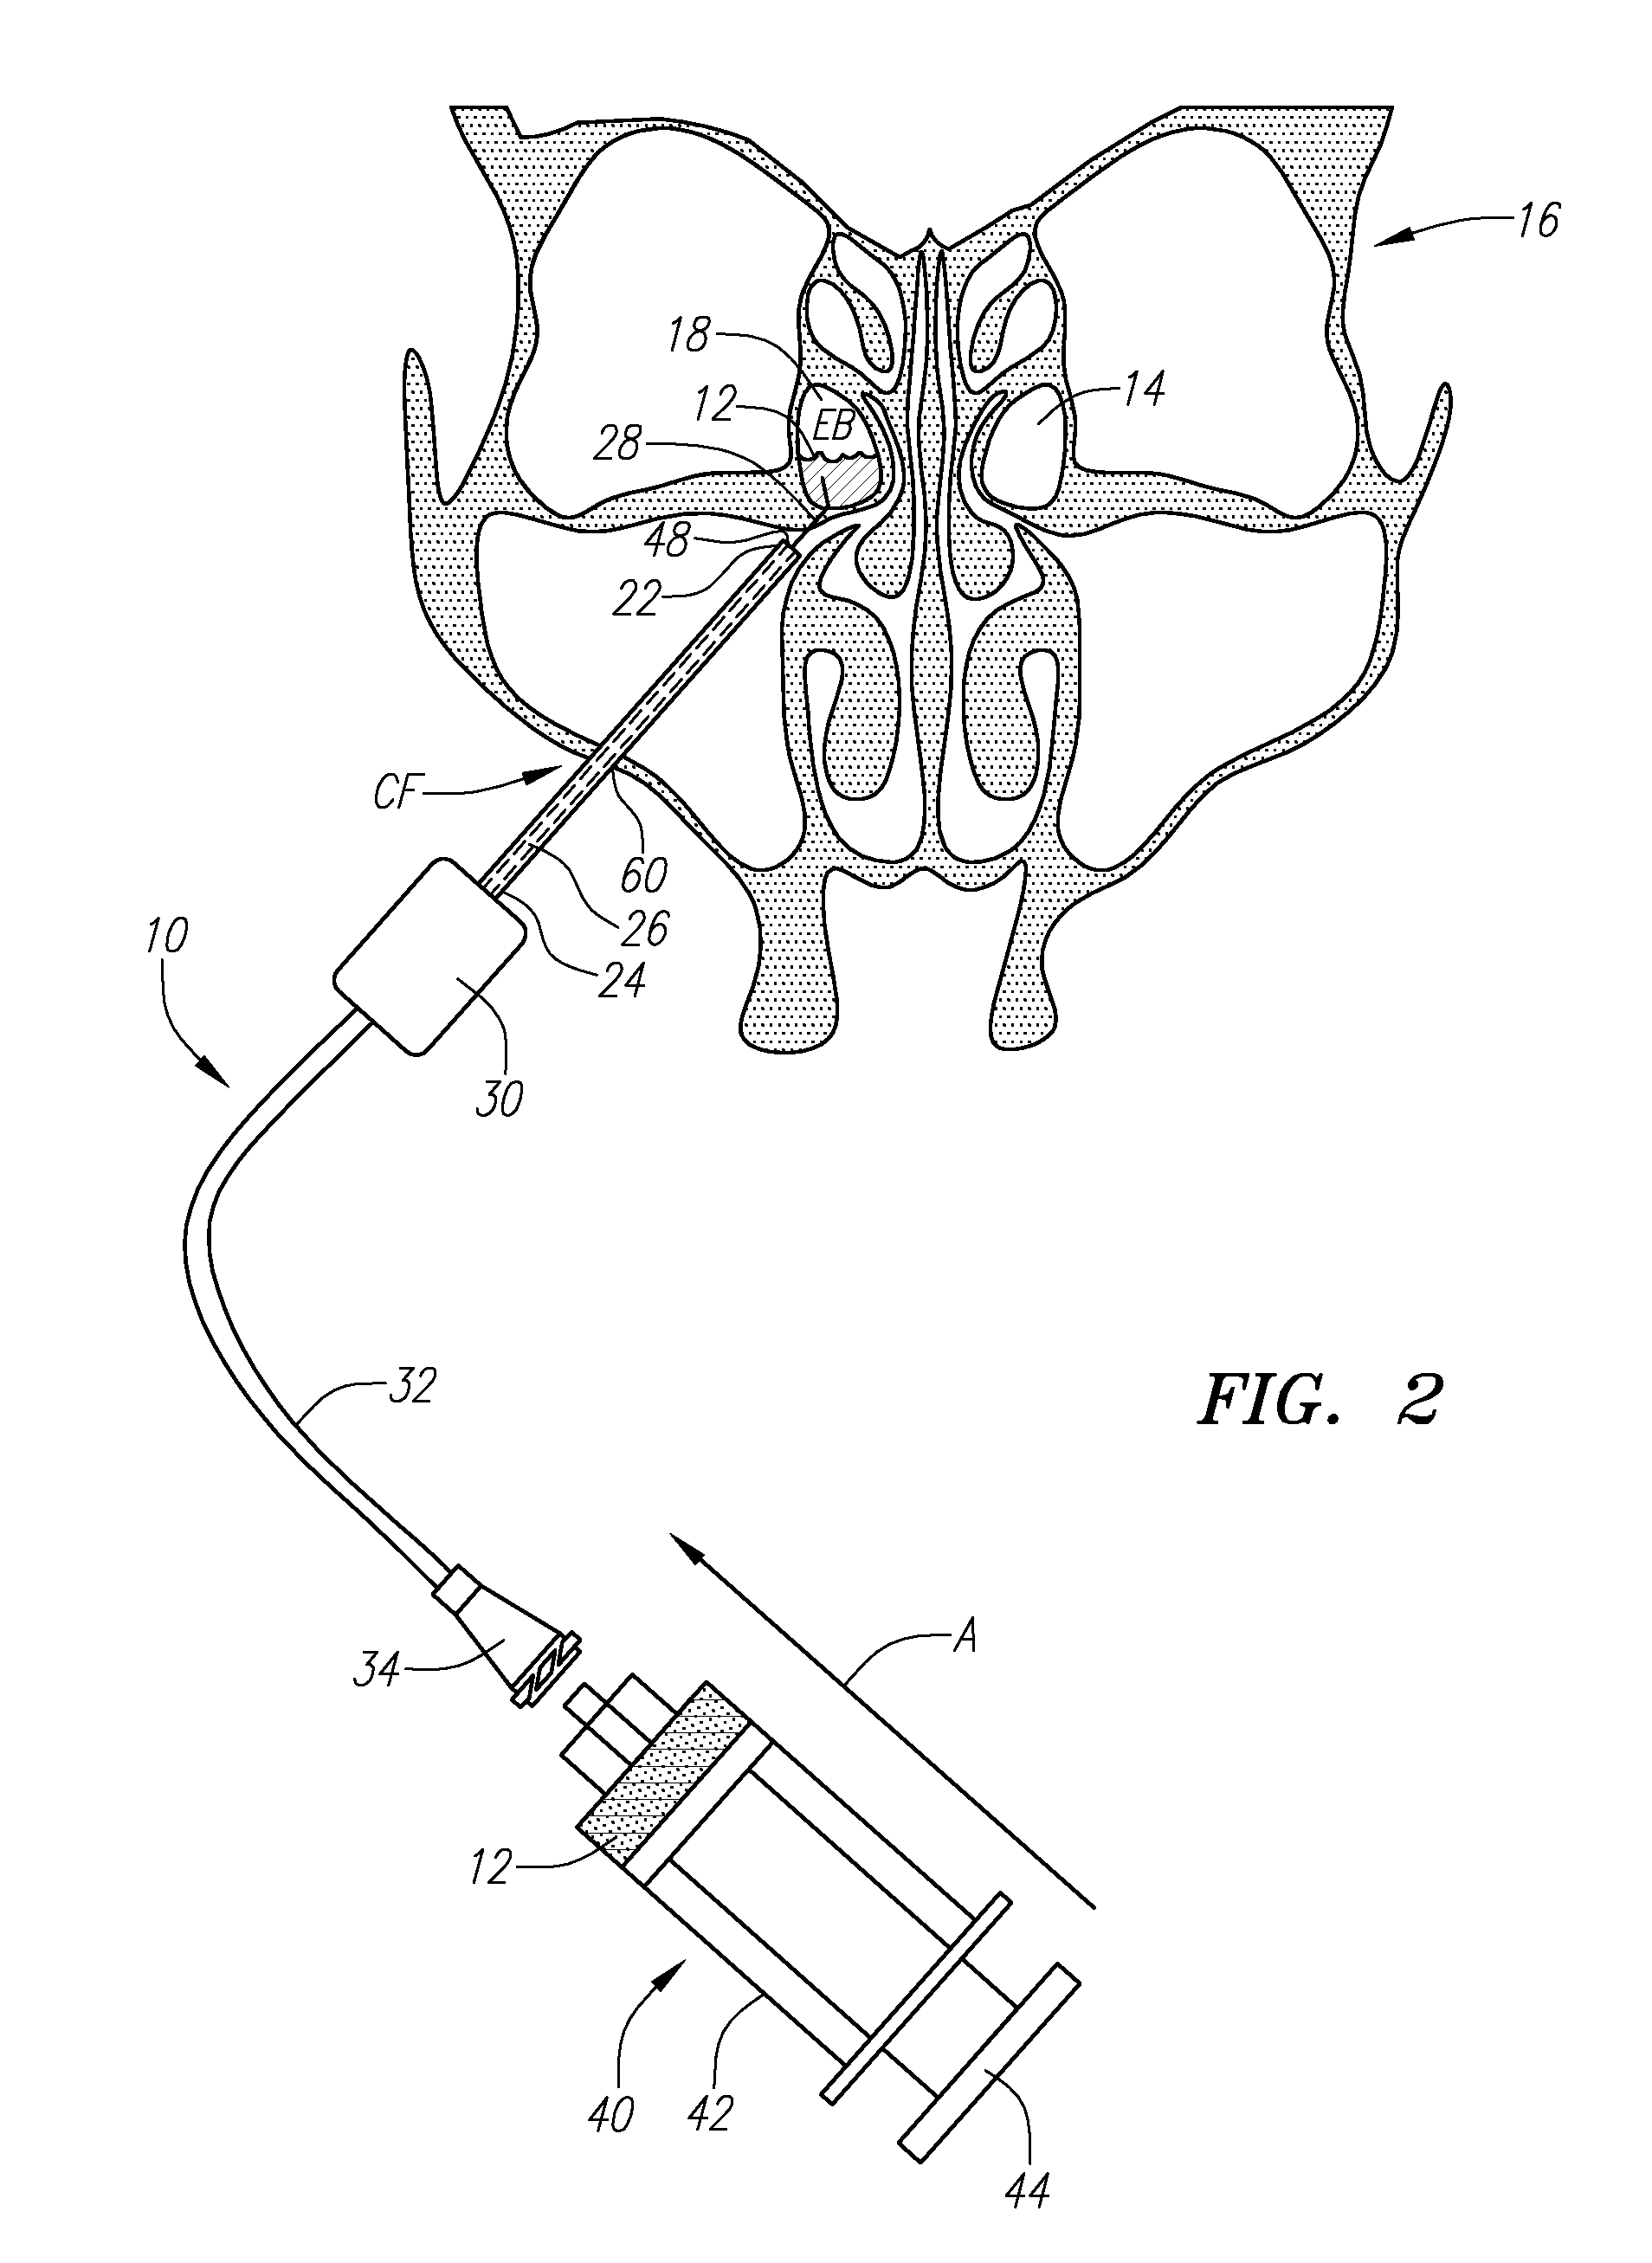 Apparatus and method for treatment of ethmoids